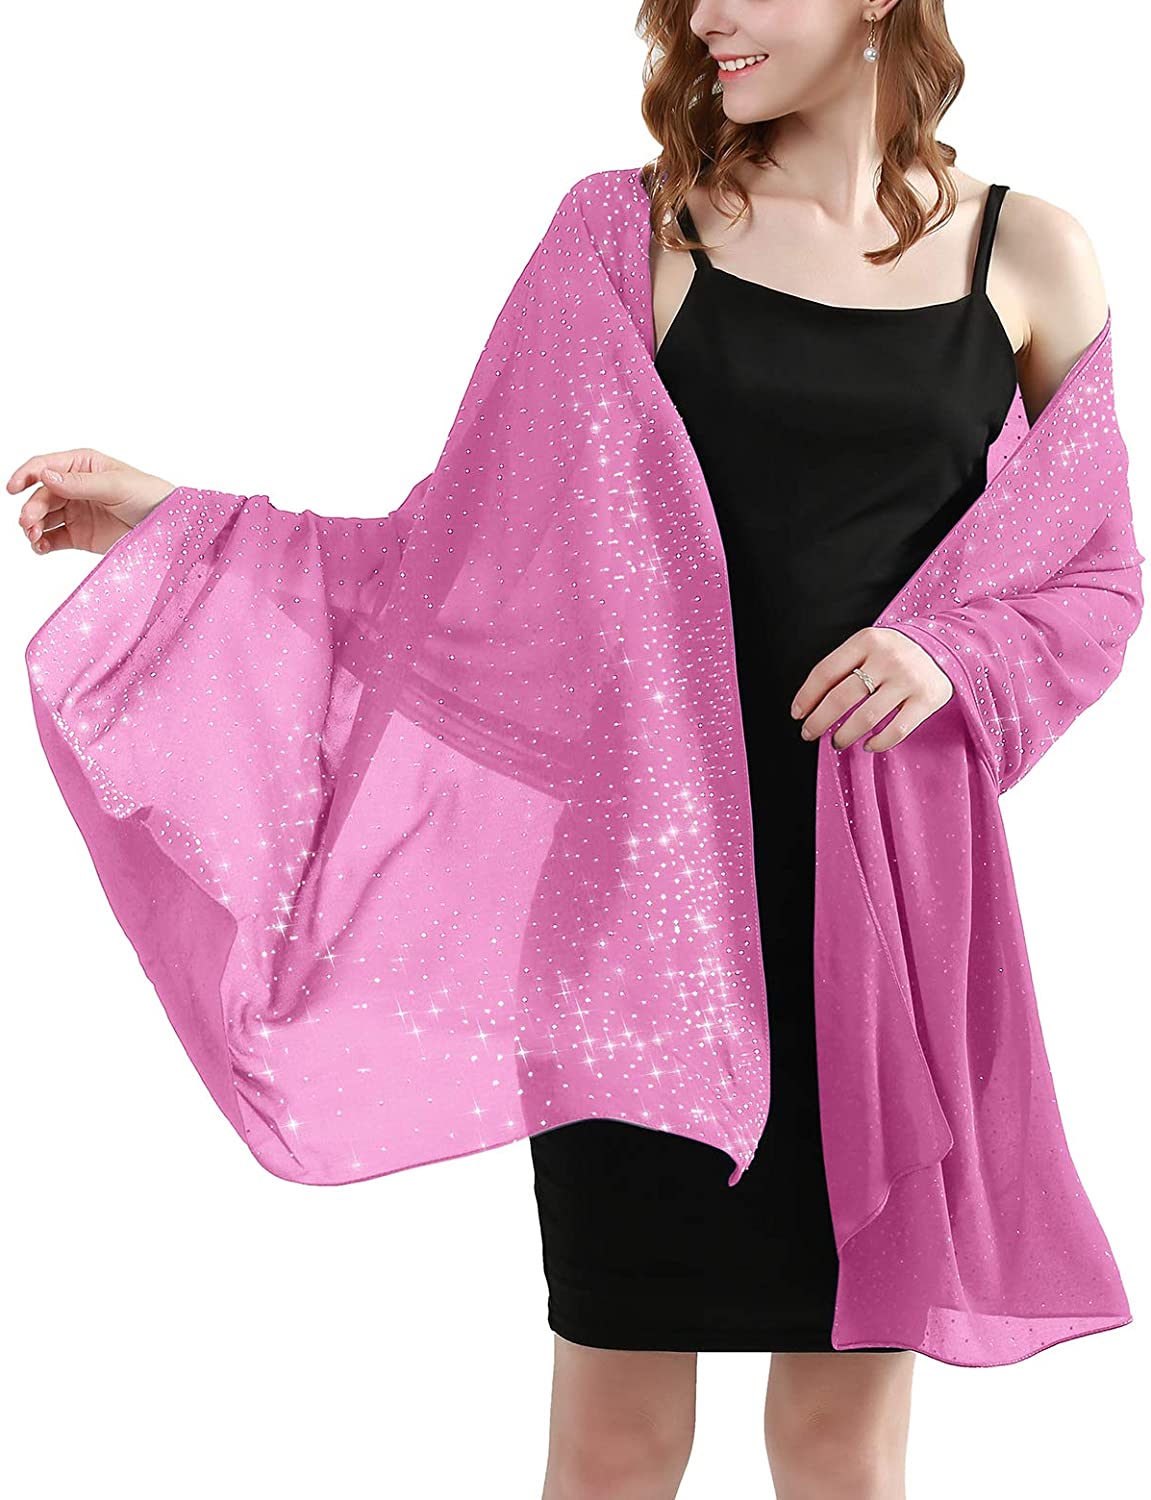 Banetteta Soft Chiffion Sparkly Rhinestone Shawls and Wraps for Evening Dresses 